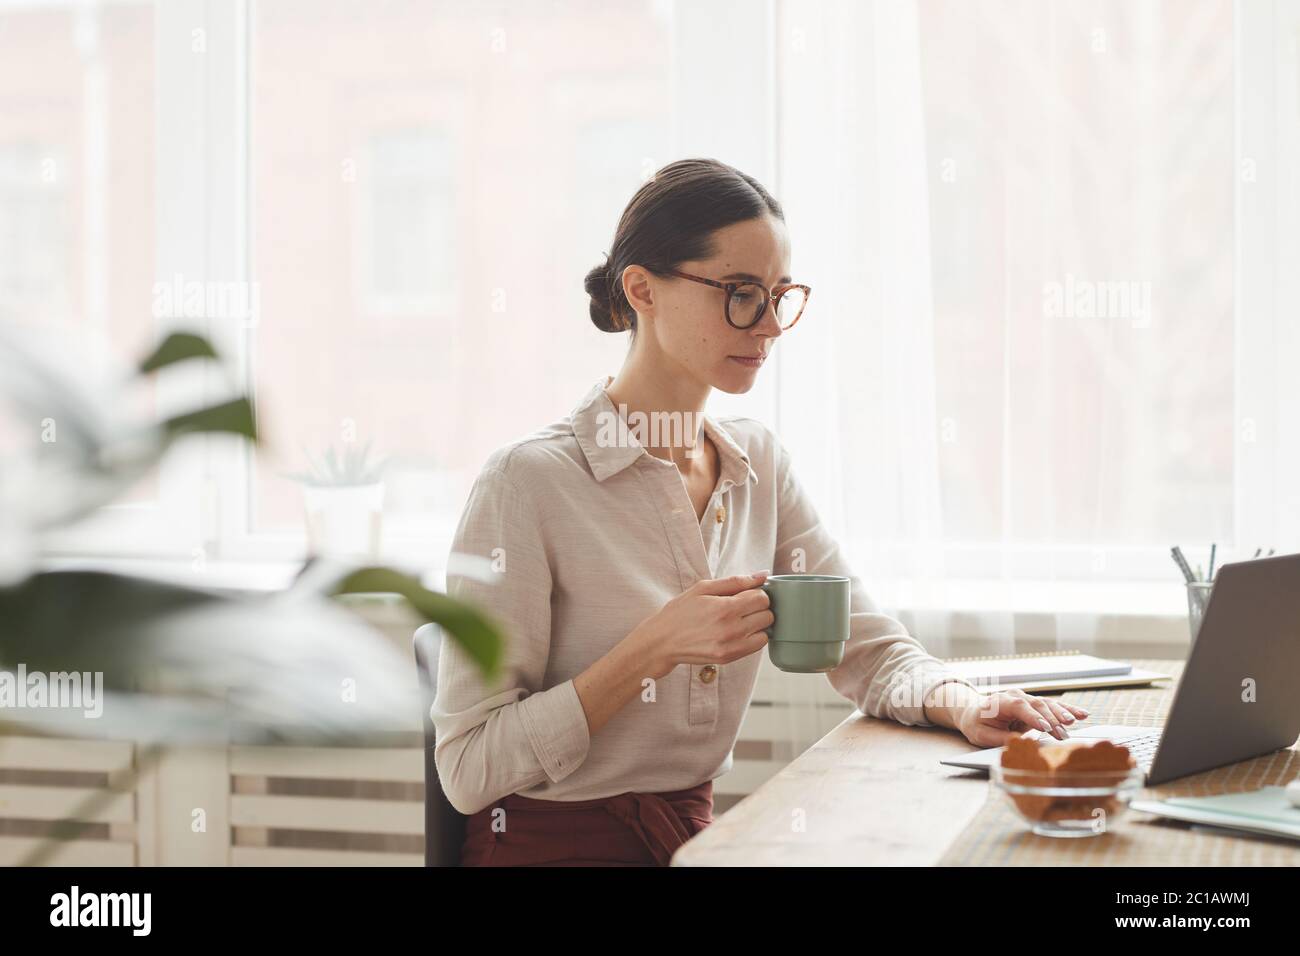 Side view portrait of elegant businesswoman wearing glasses while using laptop at cozy home office workplace Stock Photo